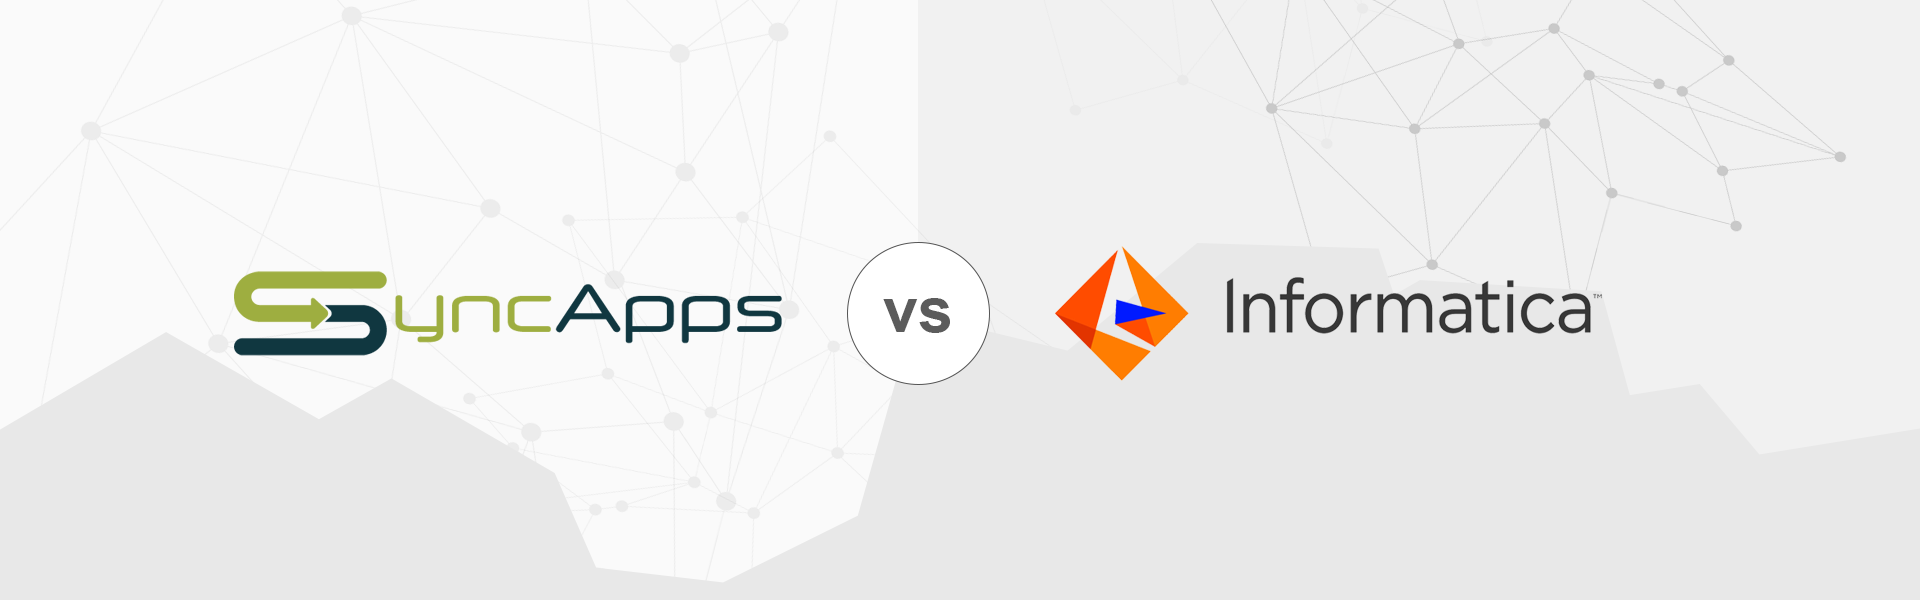 SyncApps vs Informatica Cloud: G2 Crowd User Satisfaction Ratings